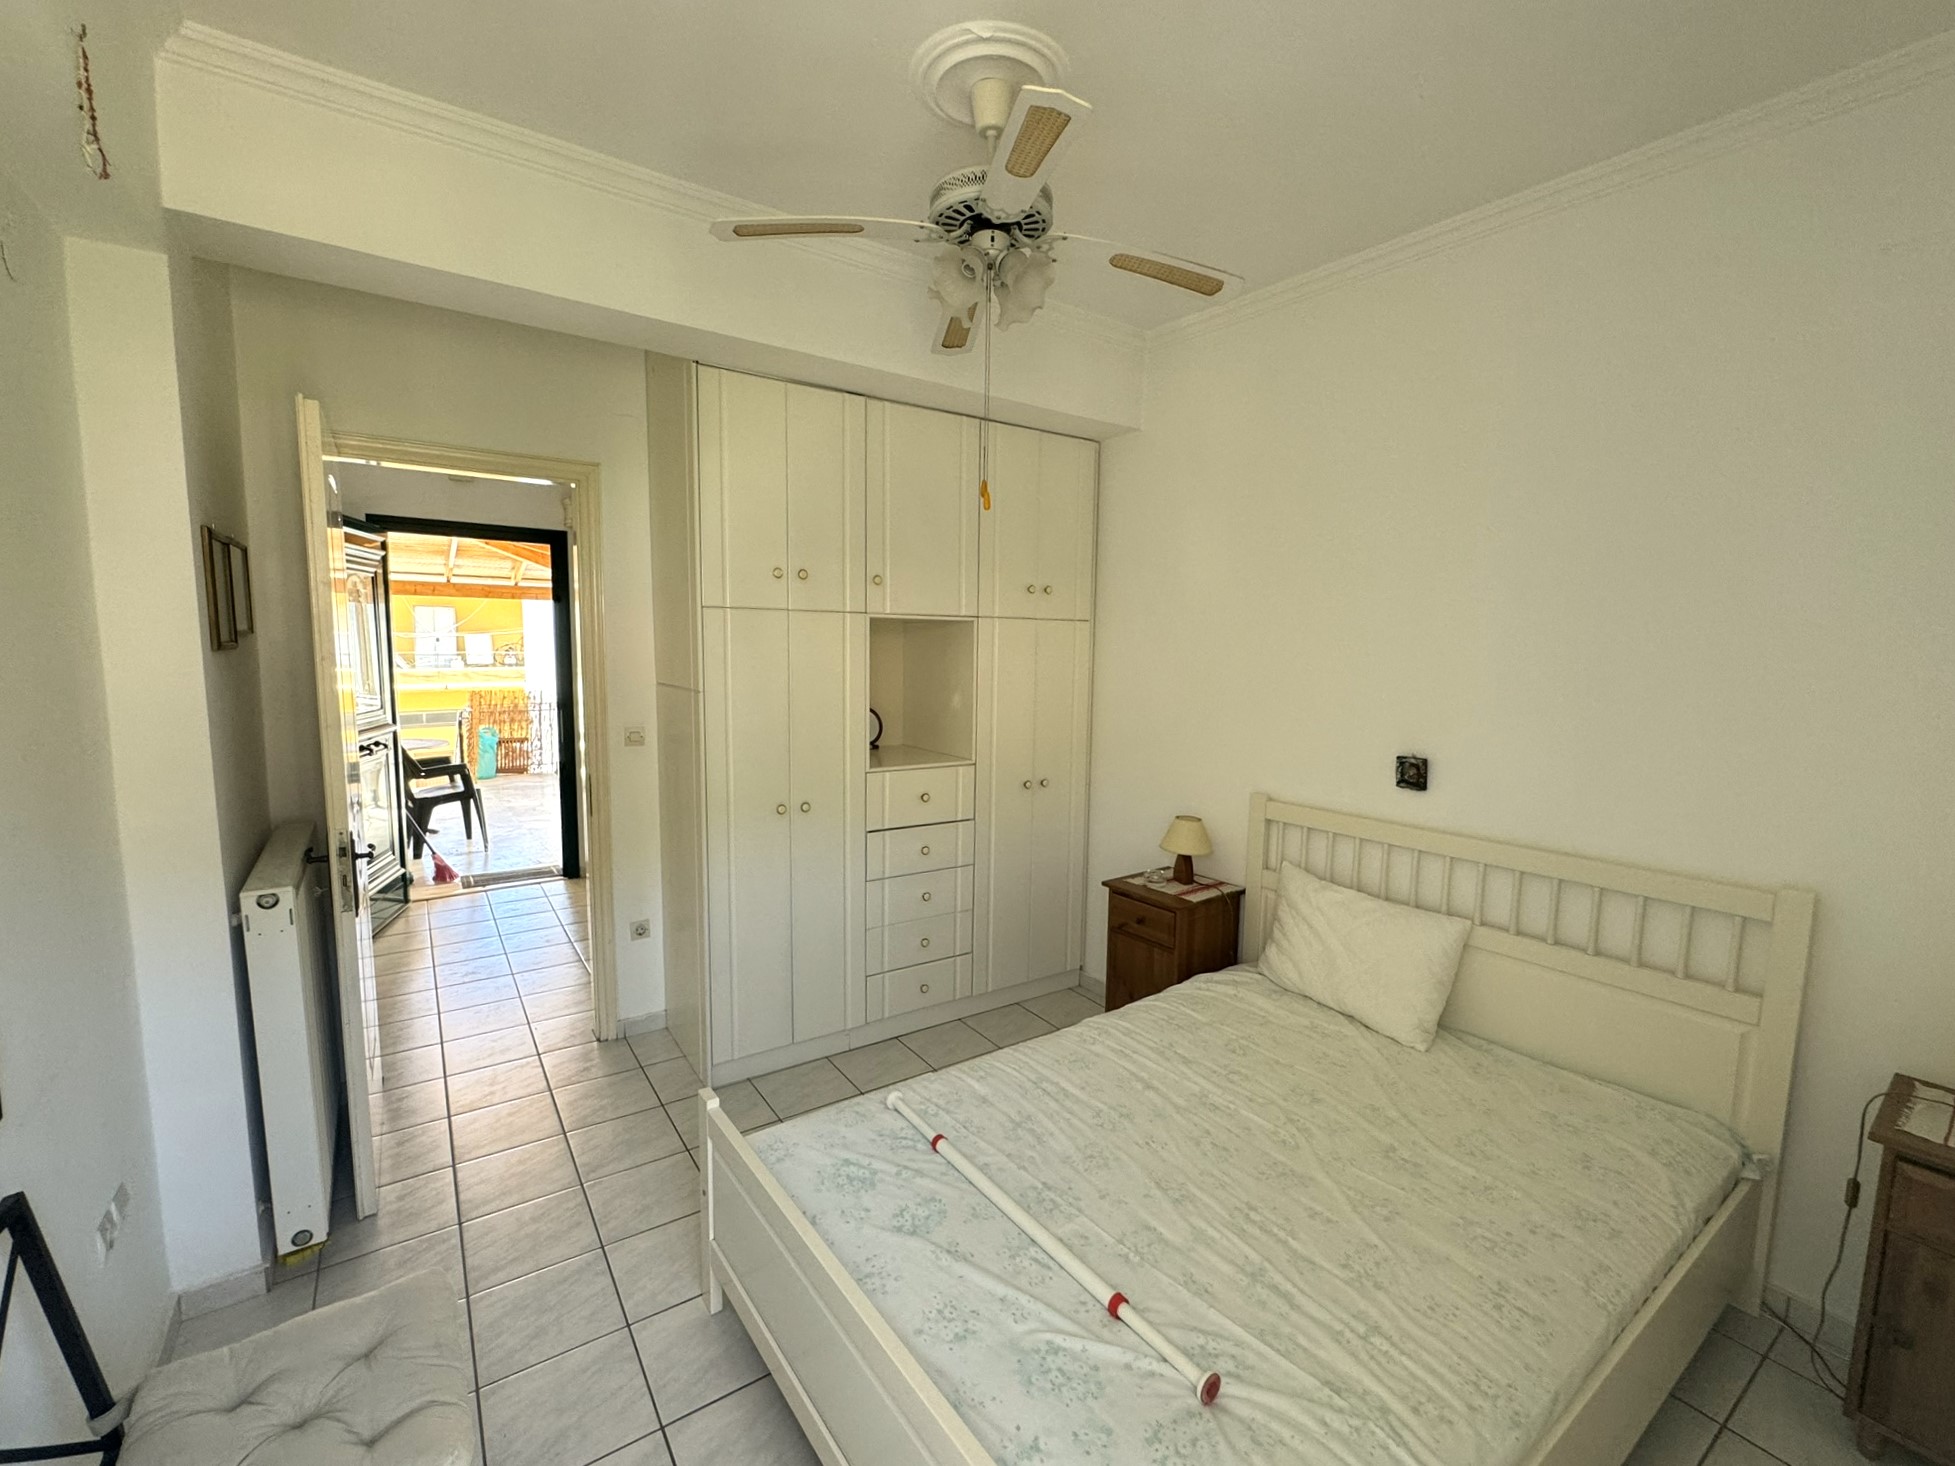 Bedroom of house for sale in Ithaca Greece Vathi